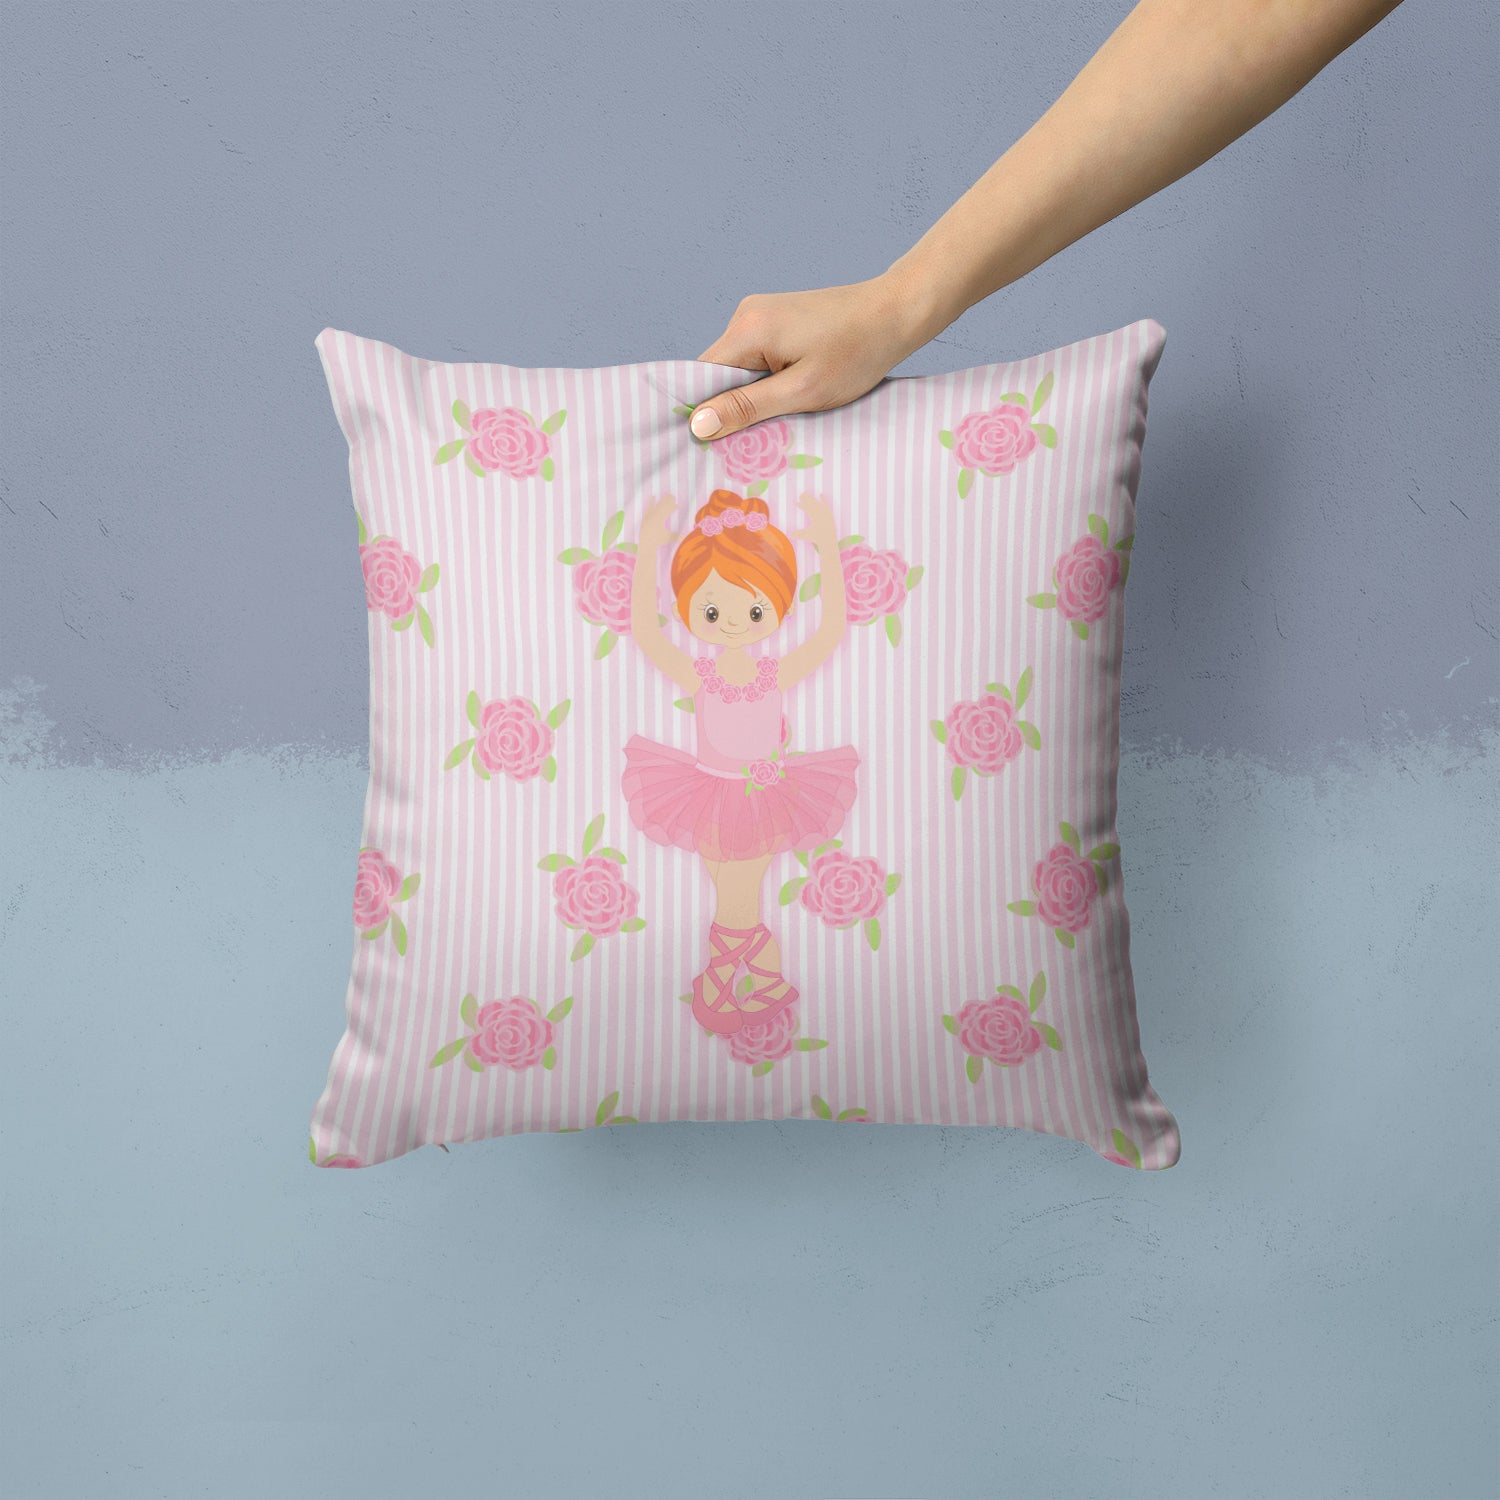 Ballerina Red Front Pose Fabric Decorative Pillow BB5169PW1414 - the-store.com